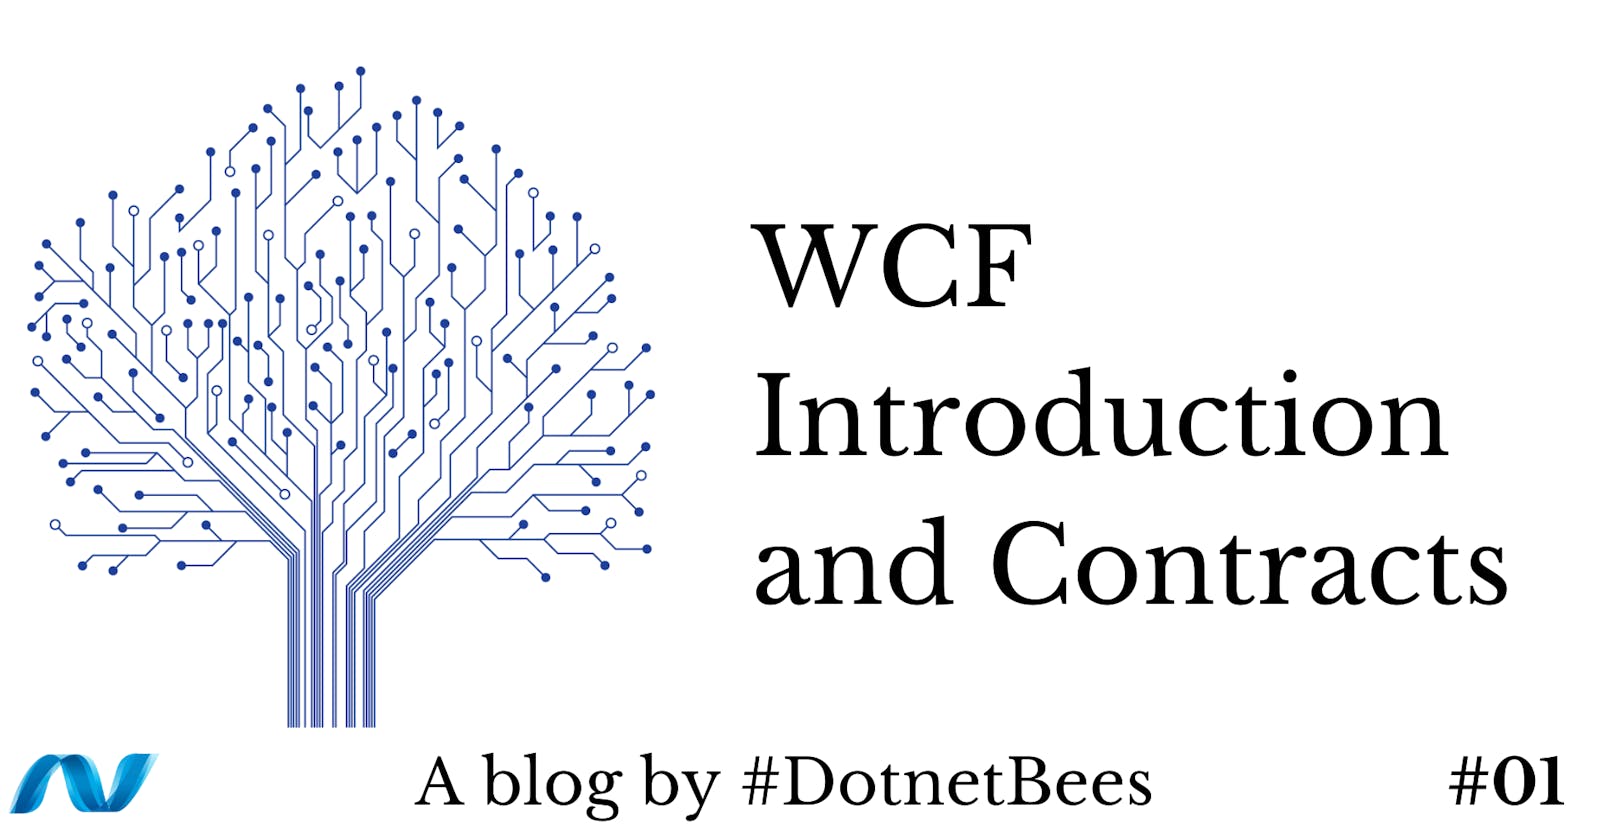 WCF Introduction and Contracts